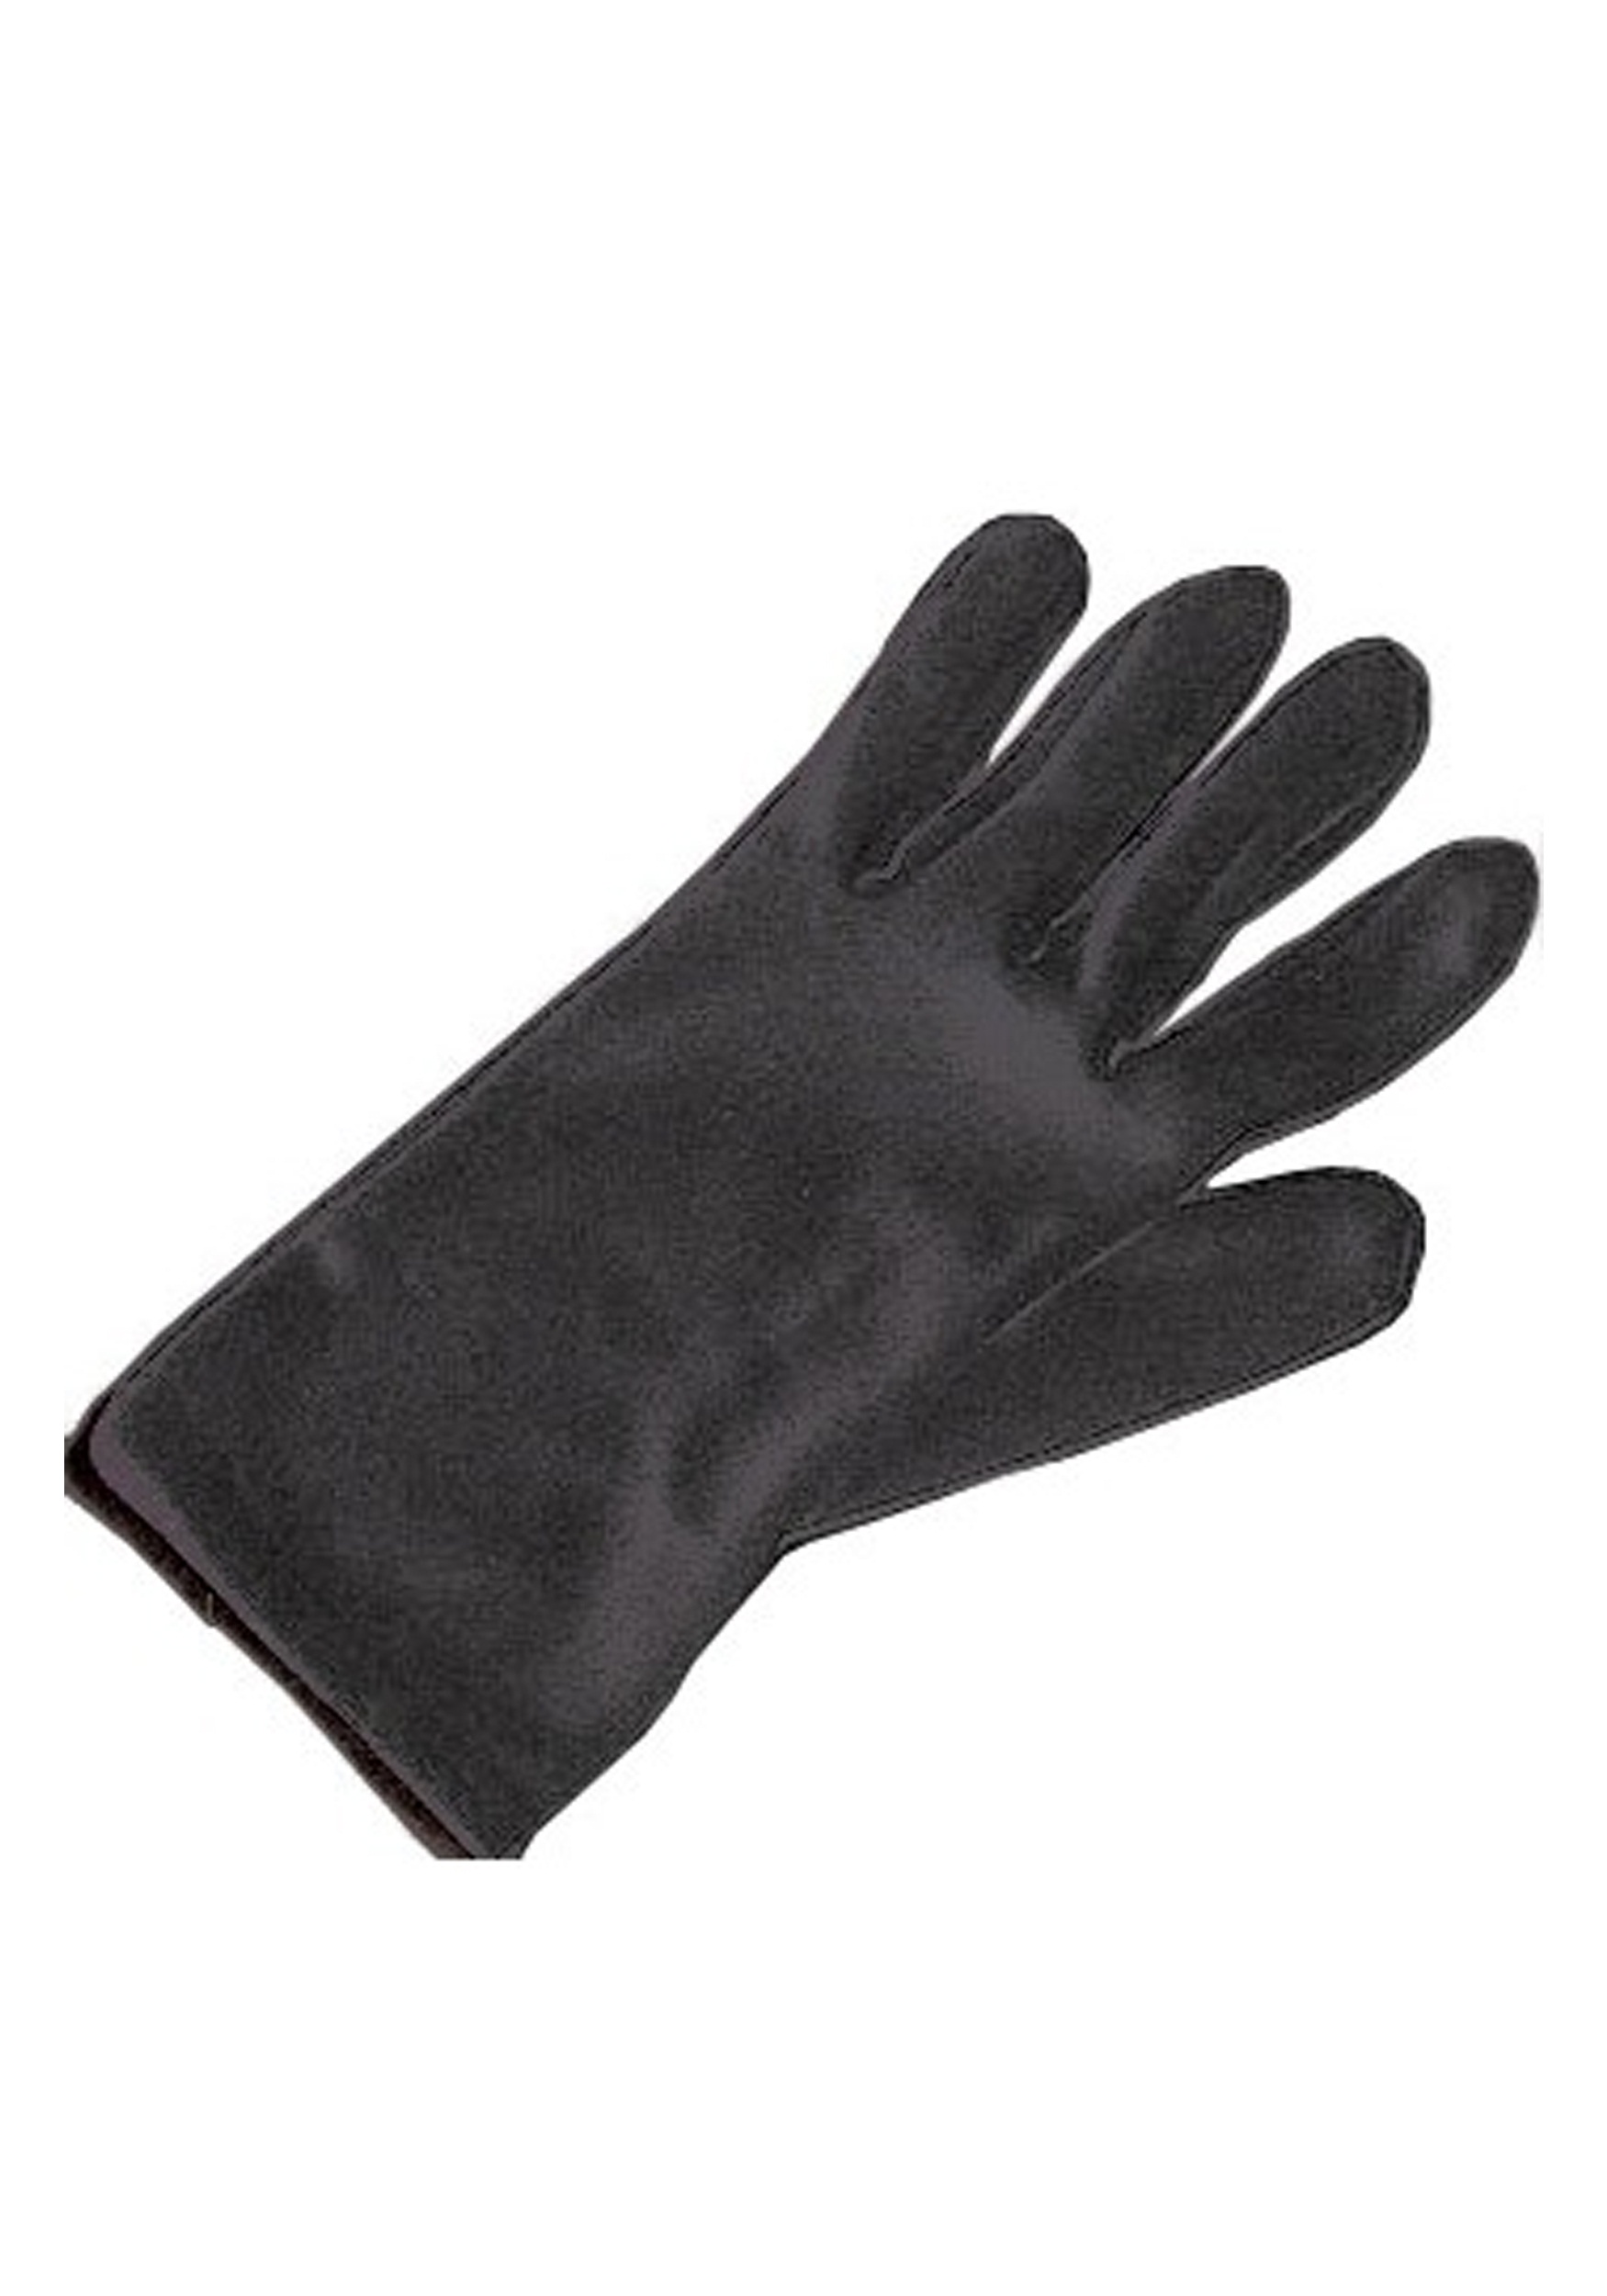 Black Fancy Dress Costume Gloves For Adults